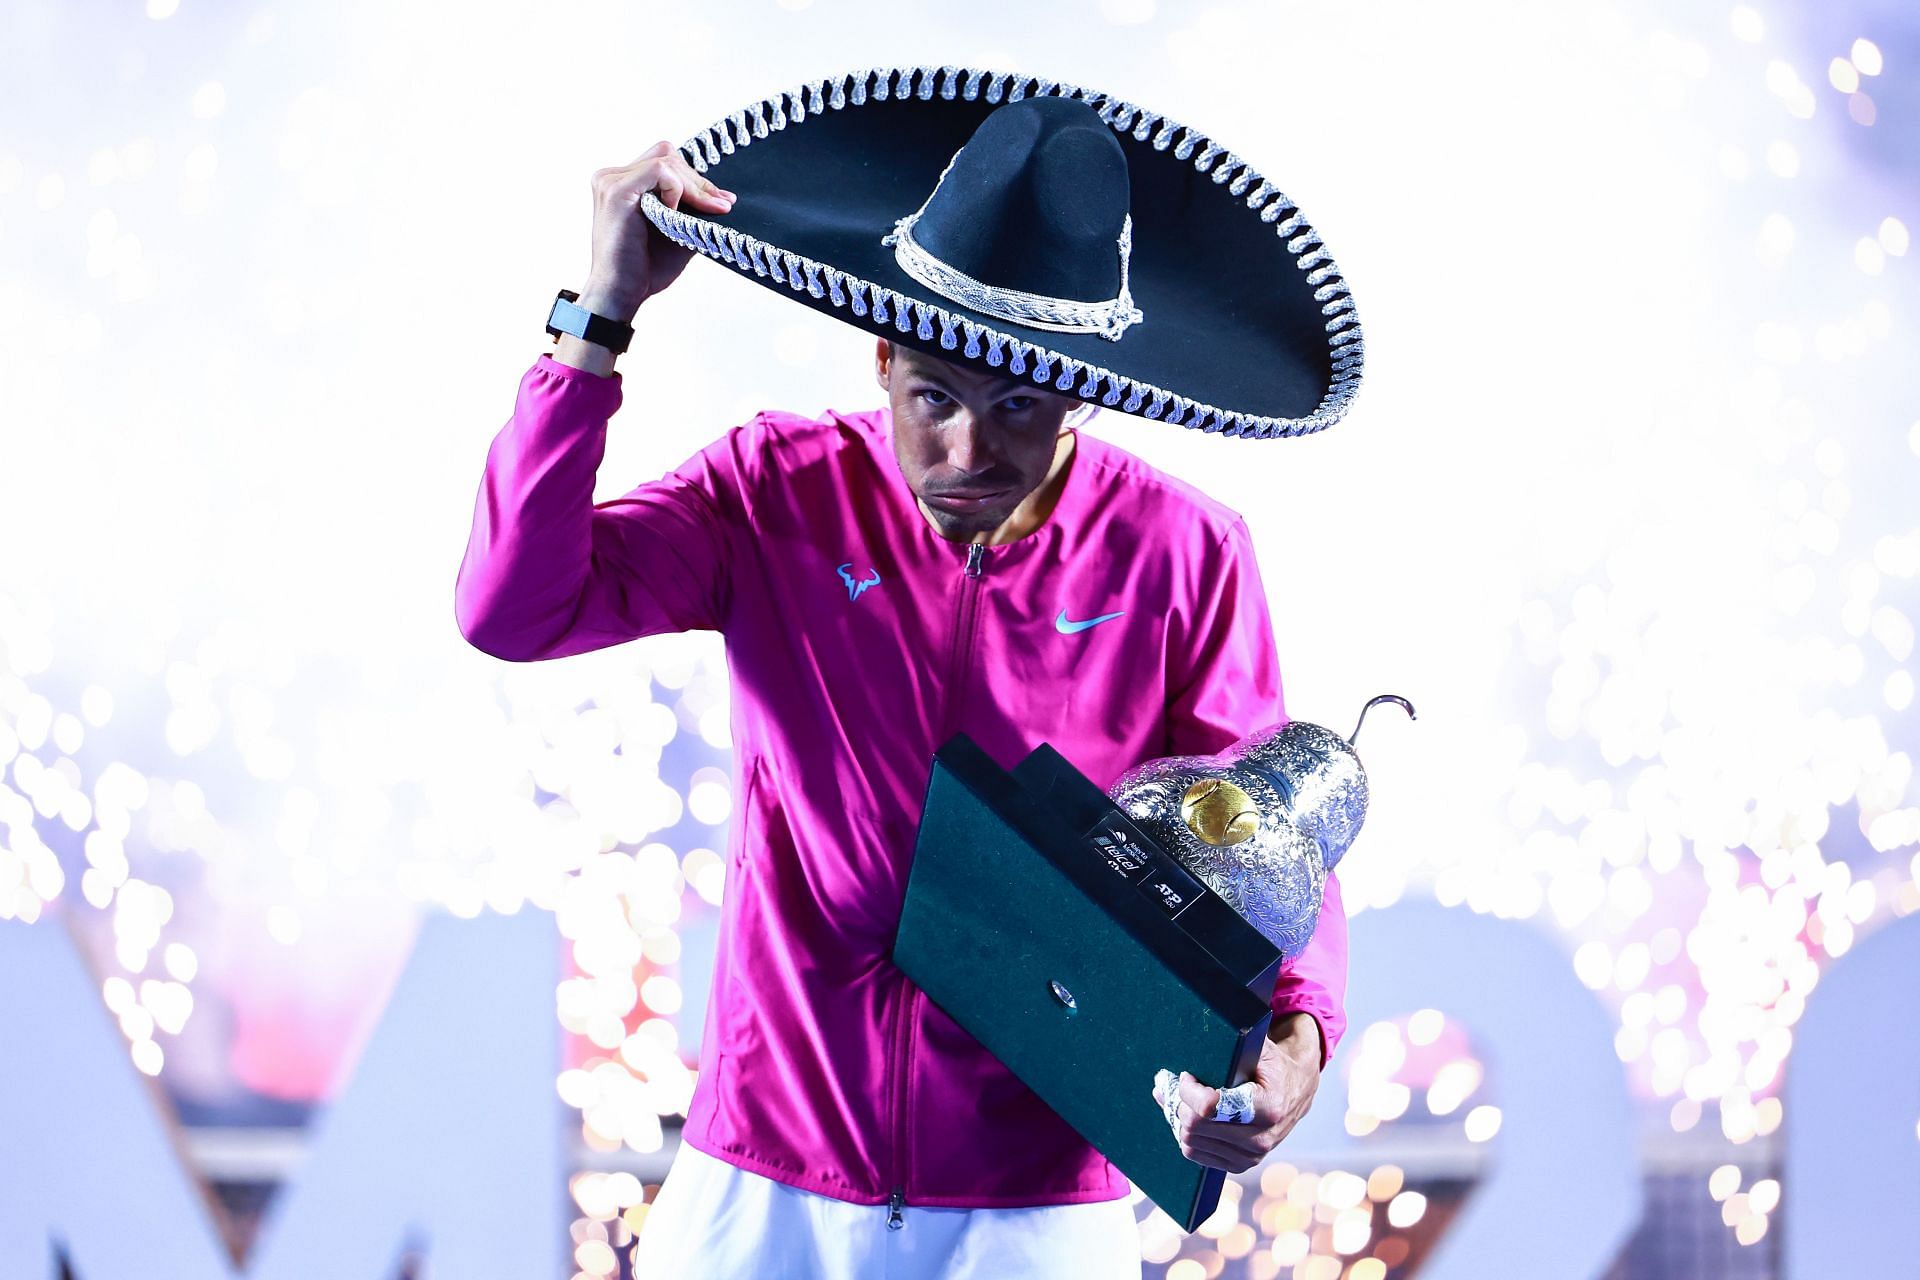 Rafael Nadal notched up his third successive title of the year at Acapulco